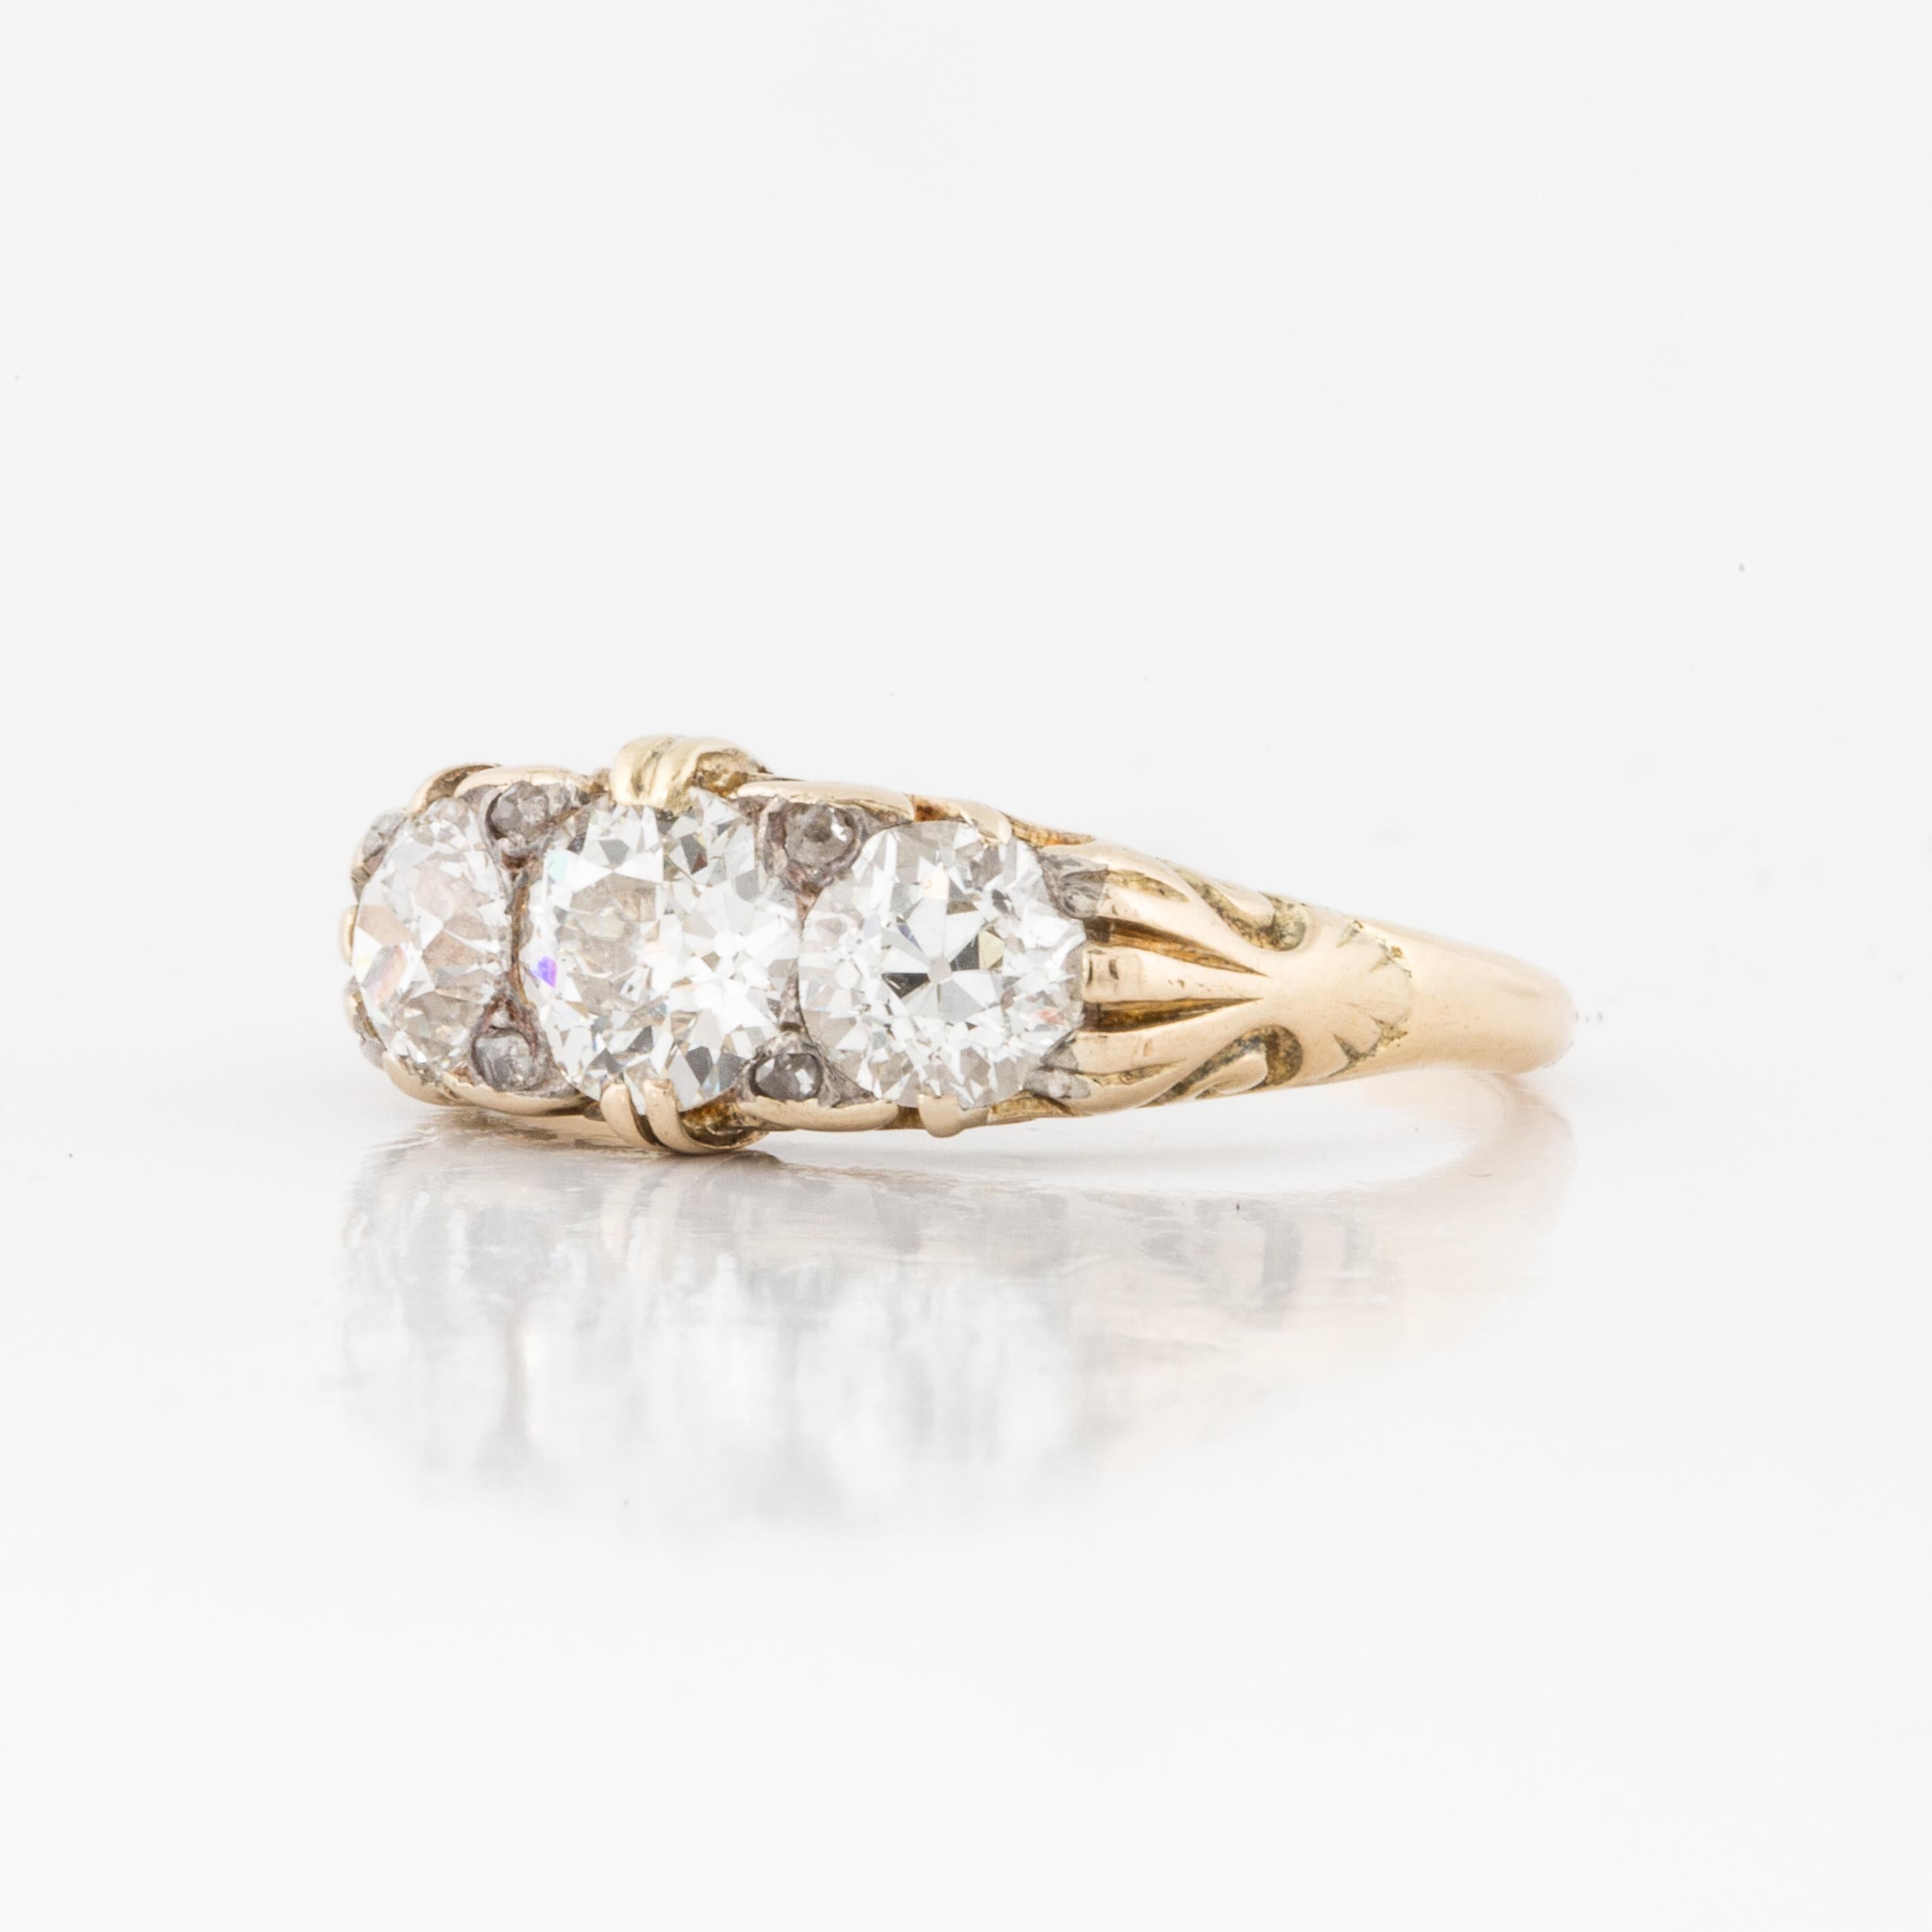 Victorian era ring composed of 18K yellow gold ring with crisp openwork and engraving featuring three Old European-cut diamonds that total 1.70 carats.  Circa 1895.  Ring is currently a size 5 3/4.  Presentation area is 5/8 inches by 1/4 inches wide.